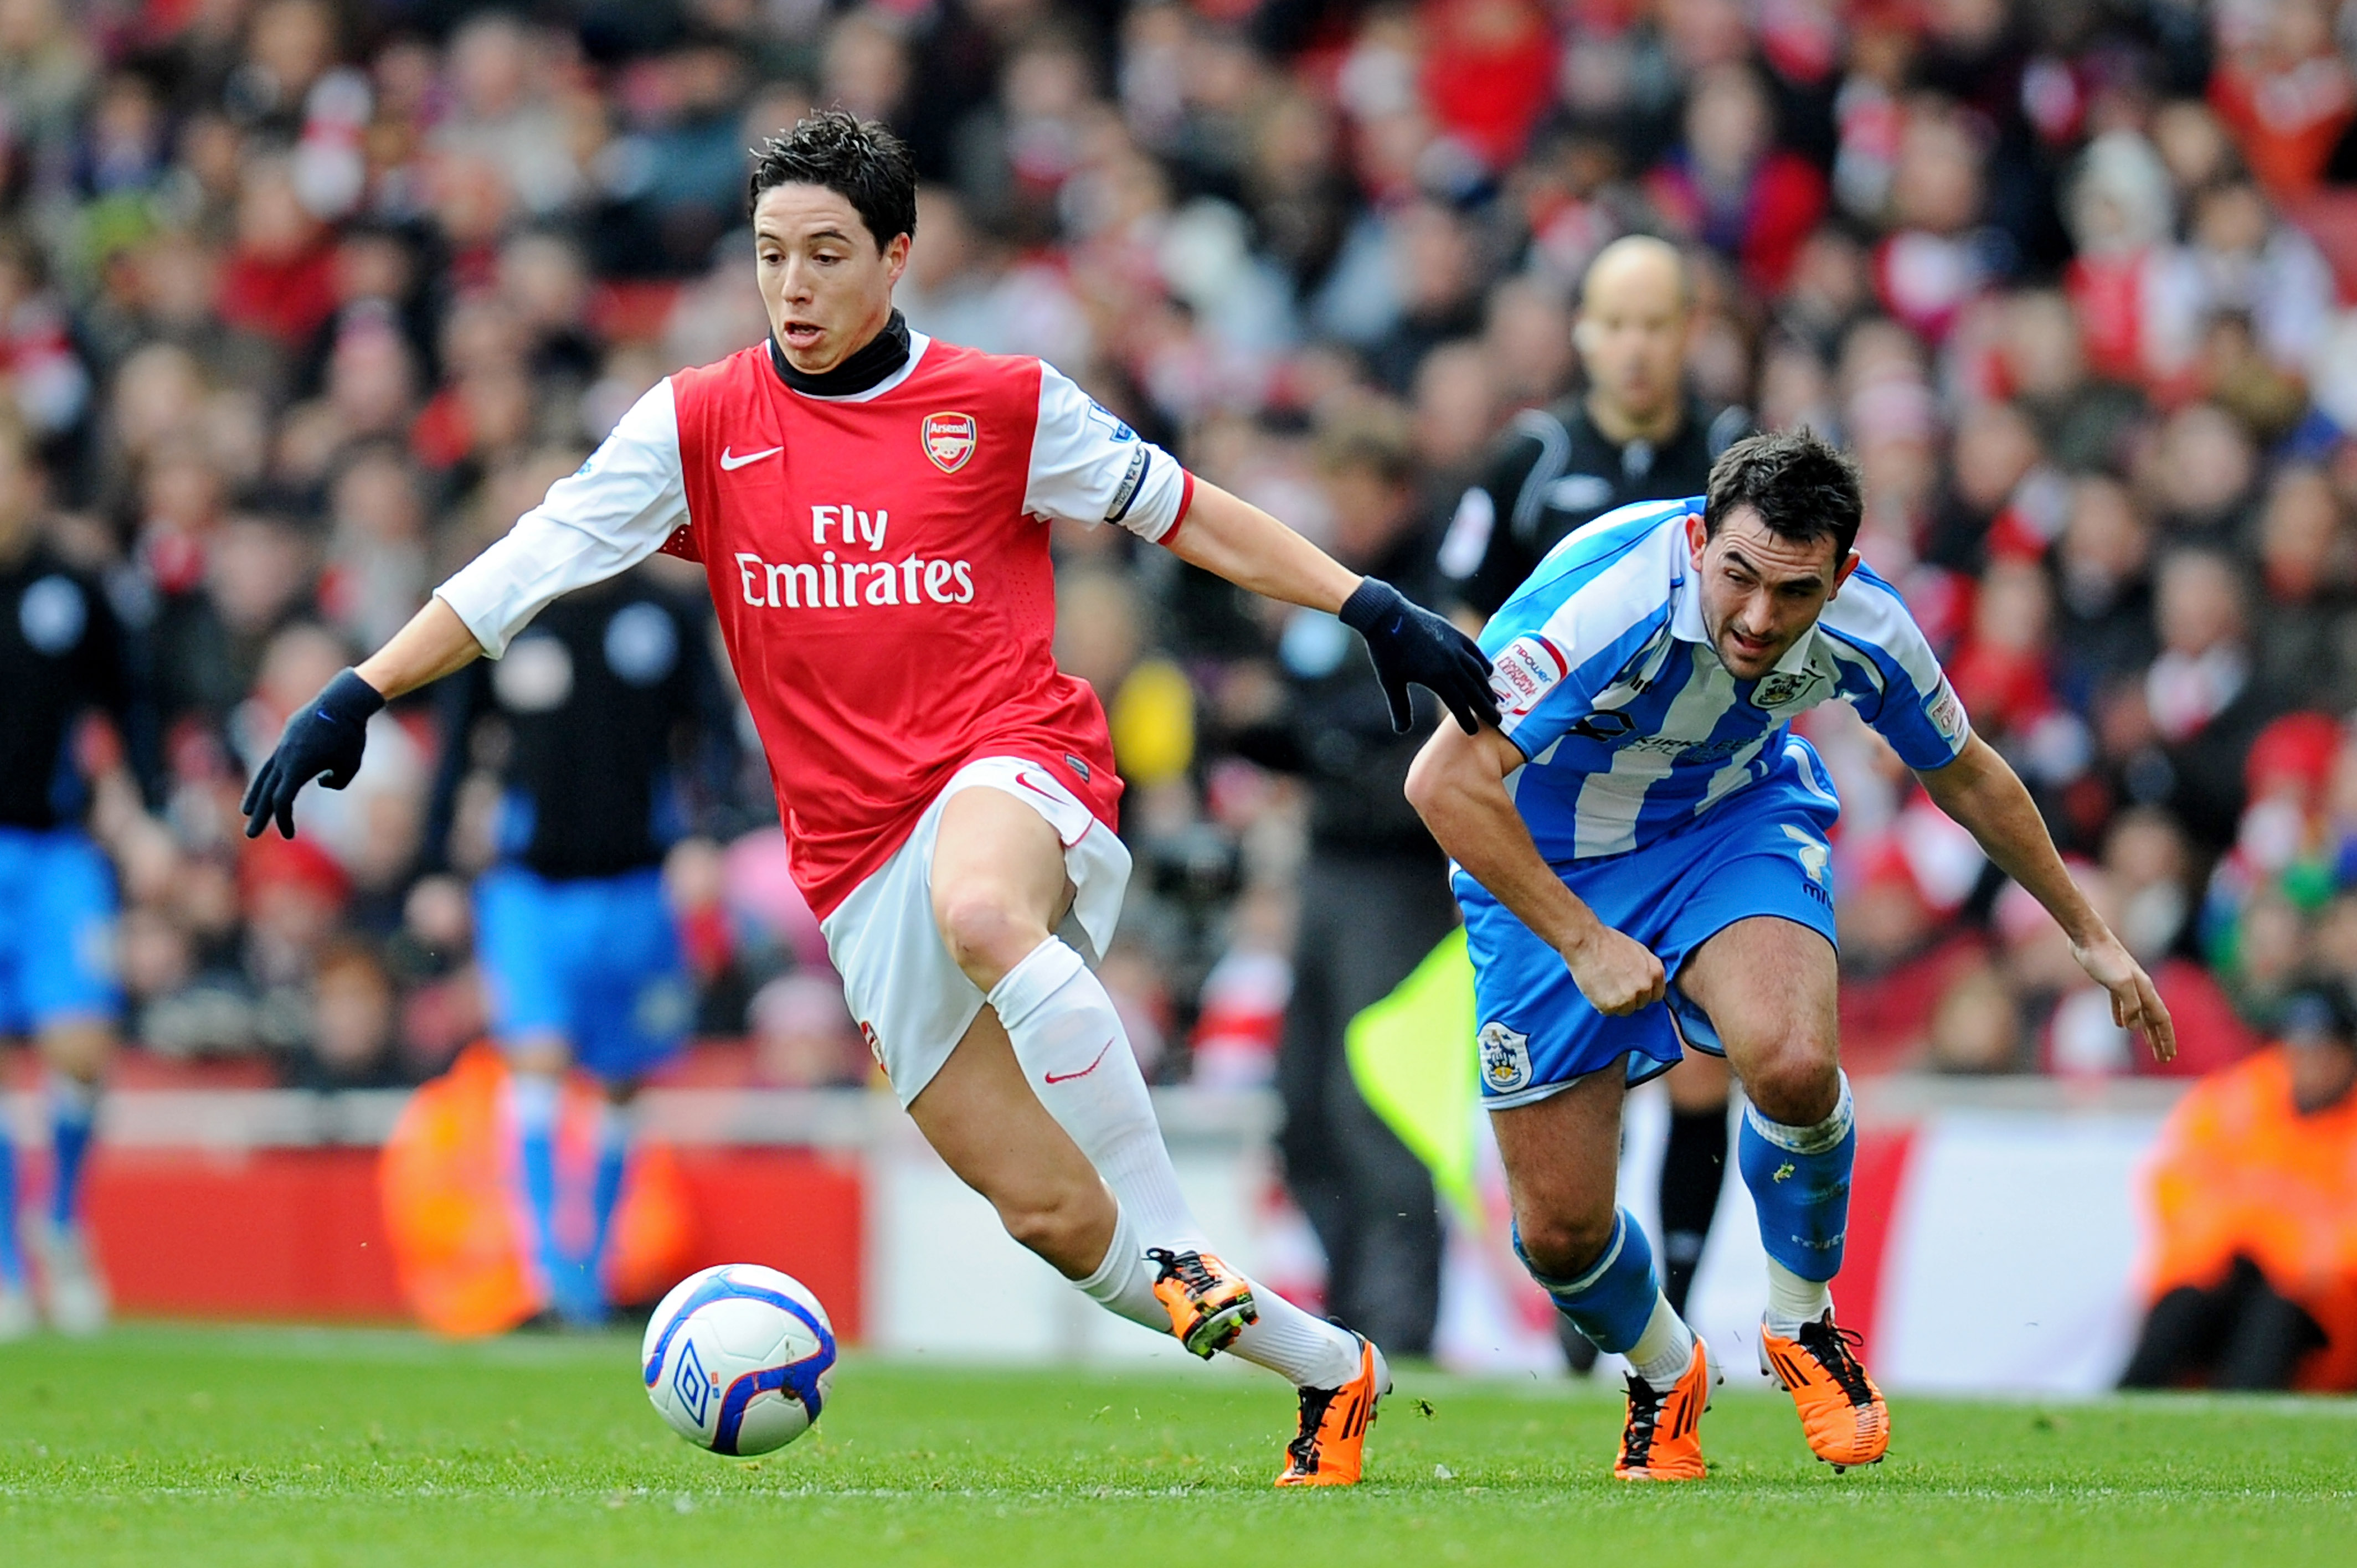 LONDON, ENGLAND - JANUARY 30:  Samir Nasri of Arsenal goes past Gary Roberts of Huddersfield during the FA Cup sponsored by E.ON fourth round match between Arsenal and Huddersfield Town at The Emirates Stadium on January 30, 2011 in London, England.  (Pho